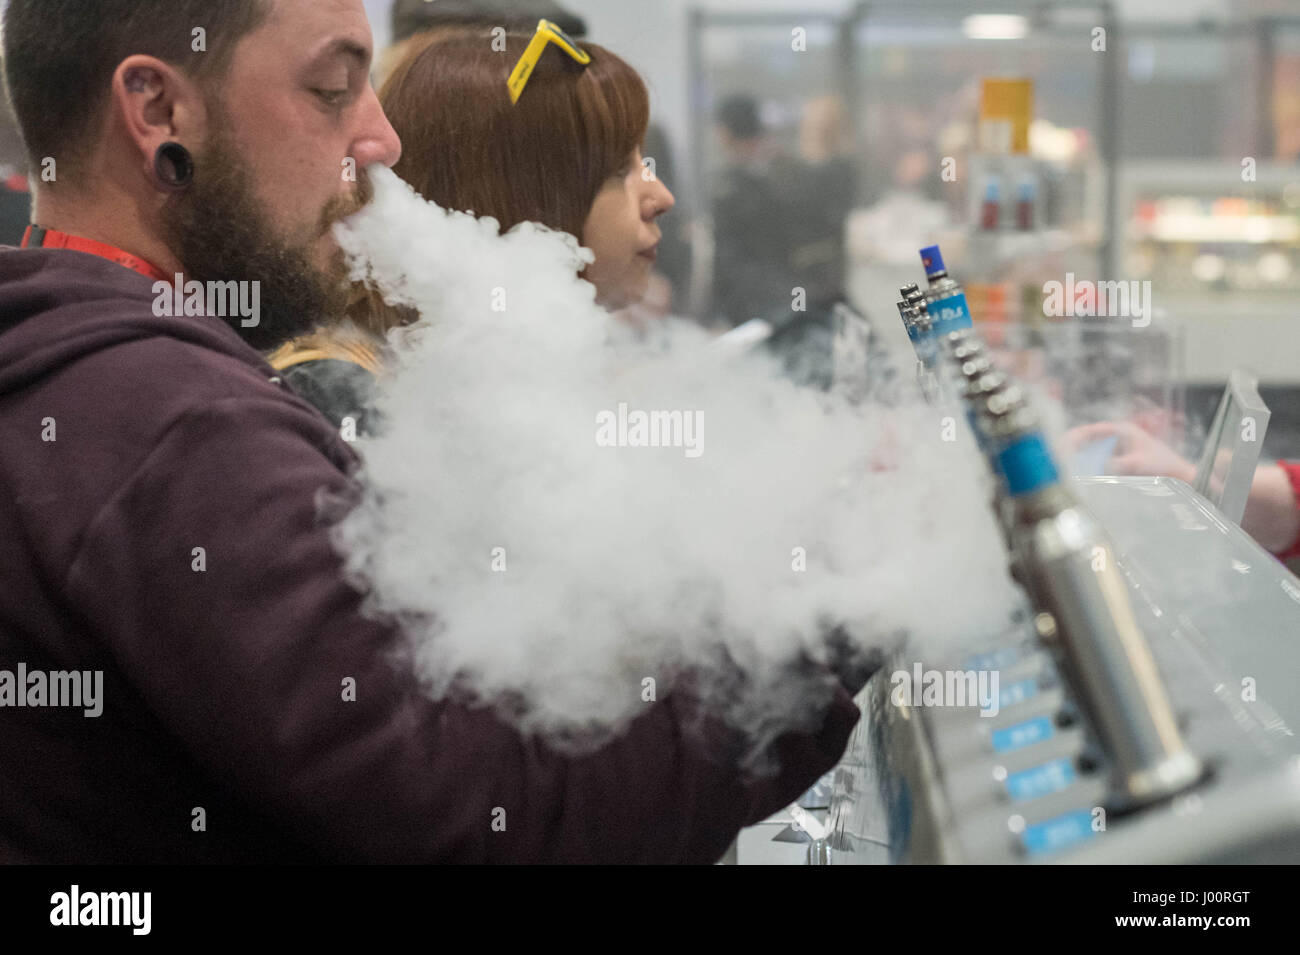 London, UK. 8th April, 2017. Vape Jam UK sees hundreds of vaping enthusiasts and electronic cigarette businesses attend the third instalment of Vape Jam convention at ExCeL London. © Guy Corbishley/Alamy Live News Stock Photo